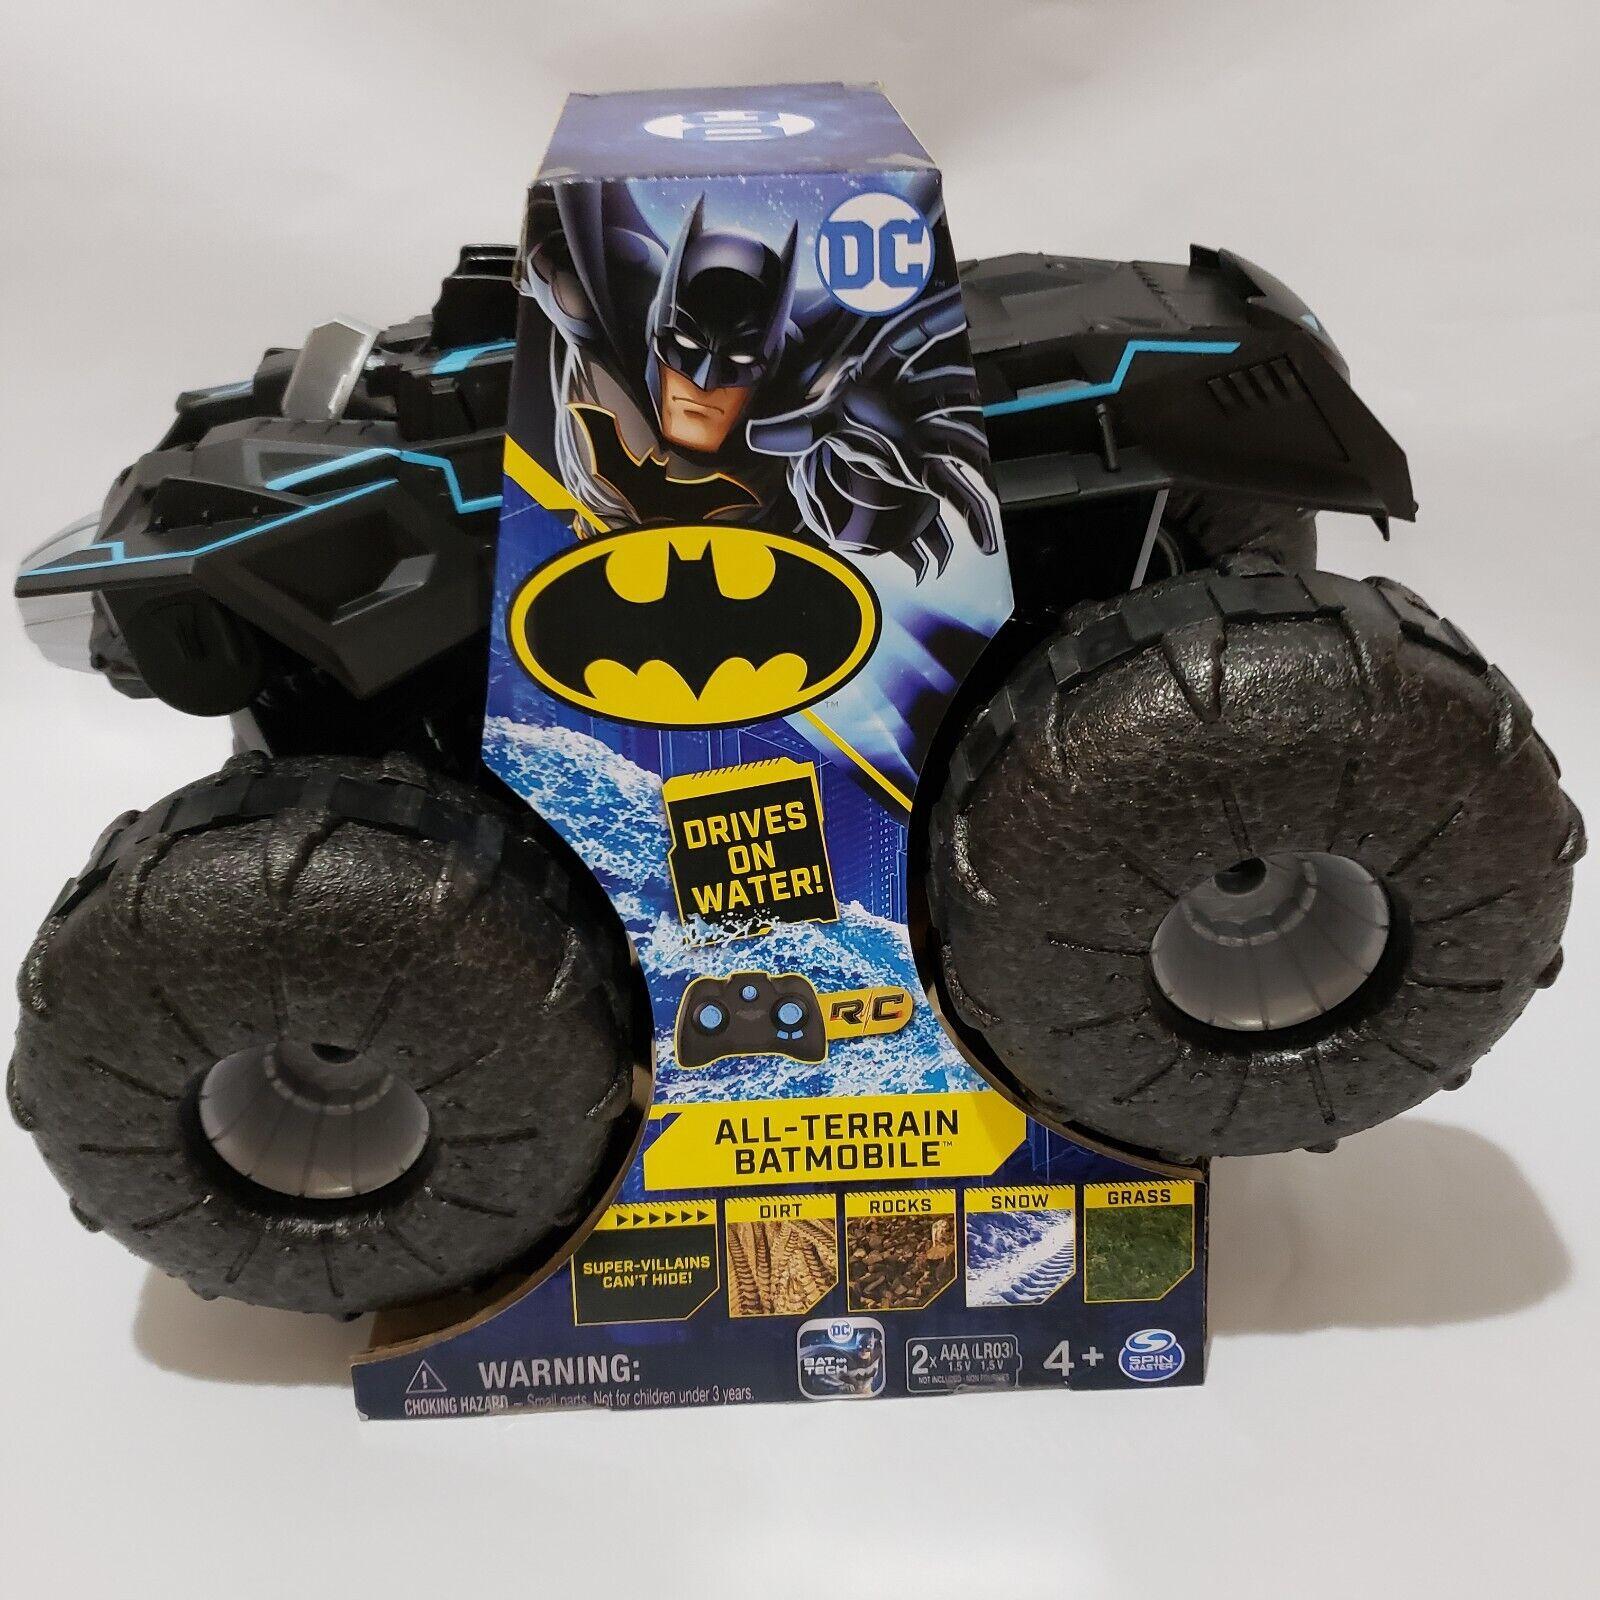 Batman All Terrain Remote Control Car: The Perfect Toy for Batman Fans of All Ages